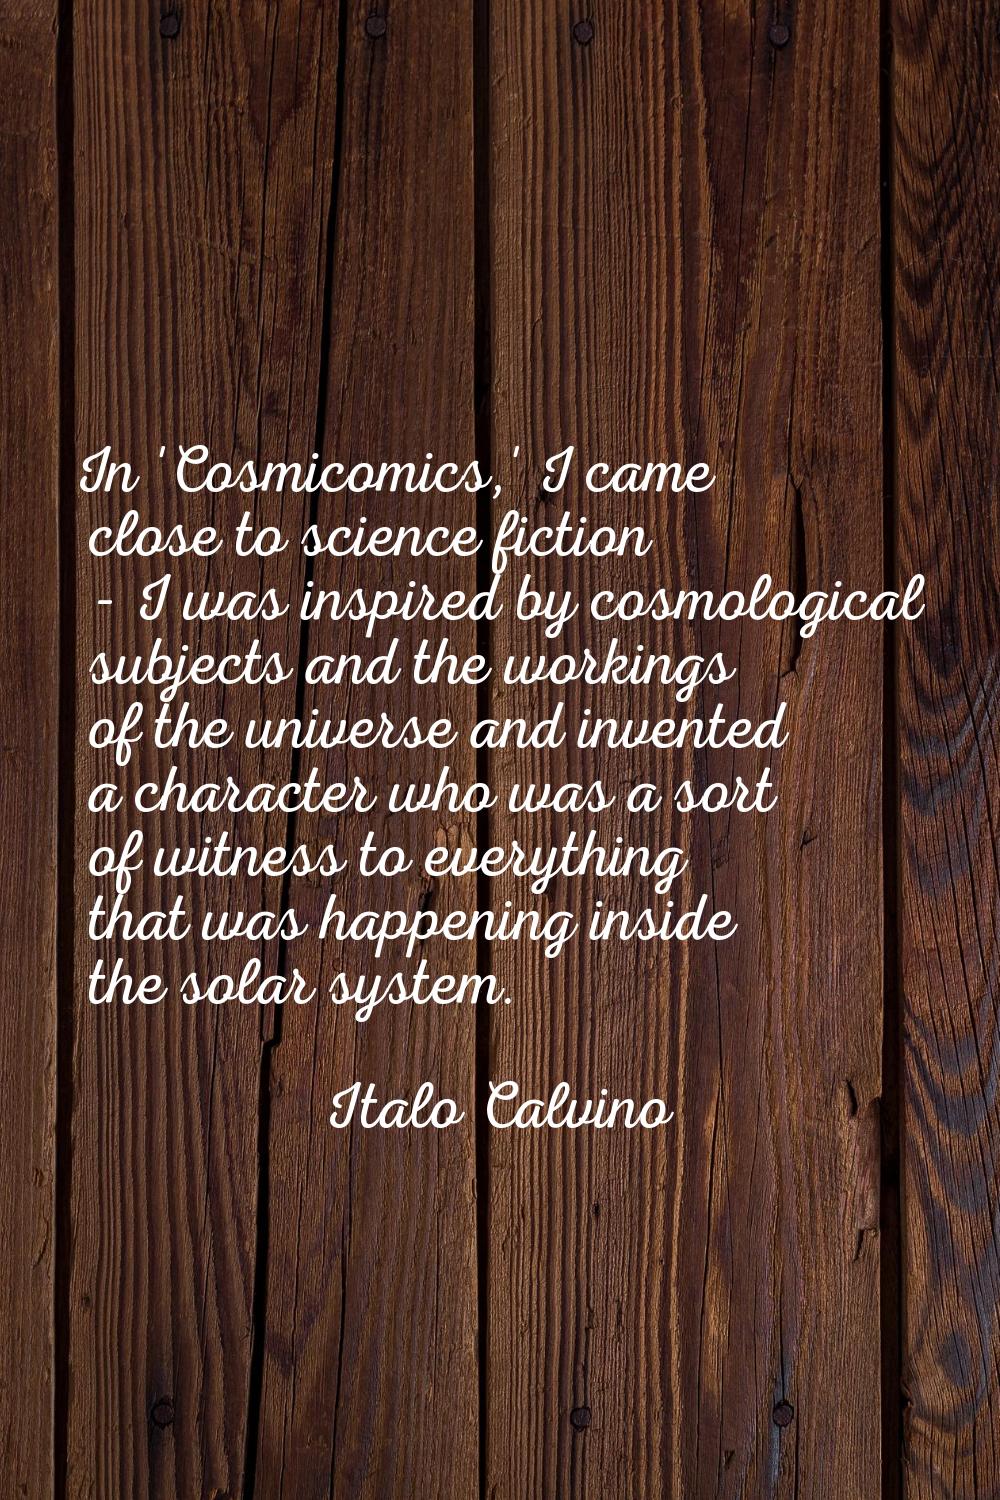 In 'Cosmicomics,' I came close to science fiction - I was inspired by cosmological subjects and the